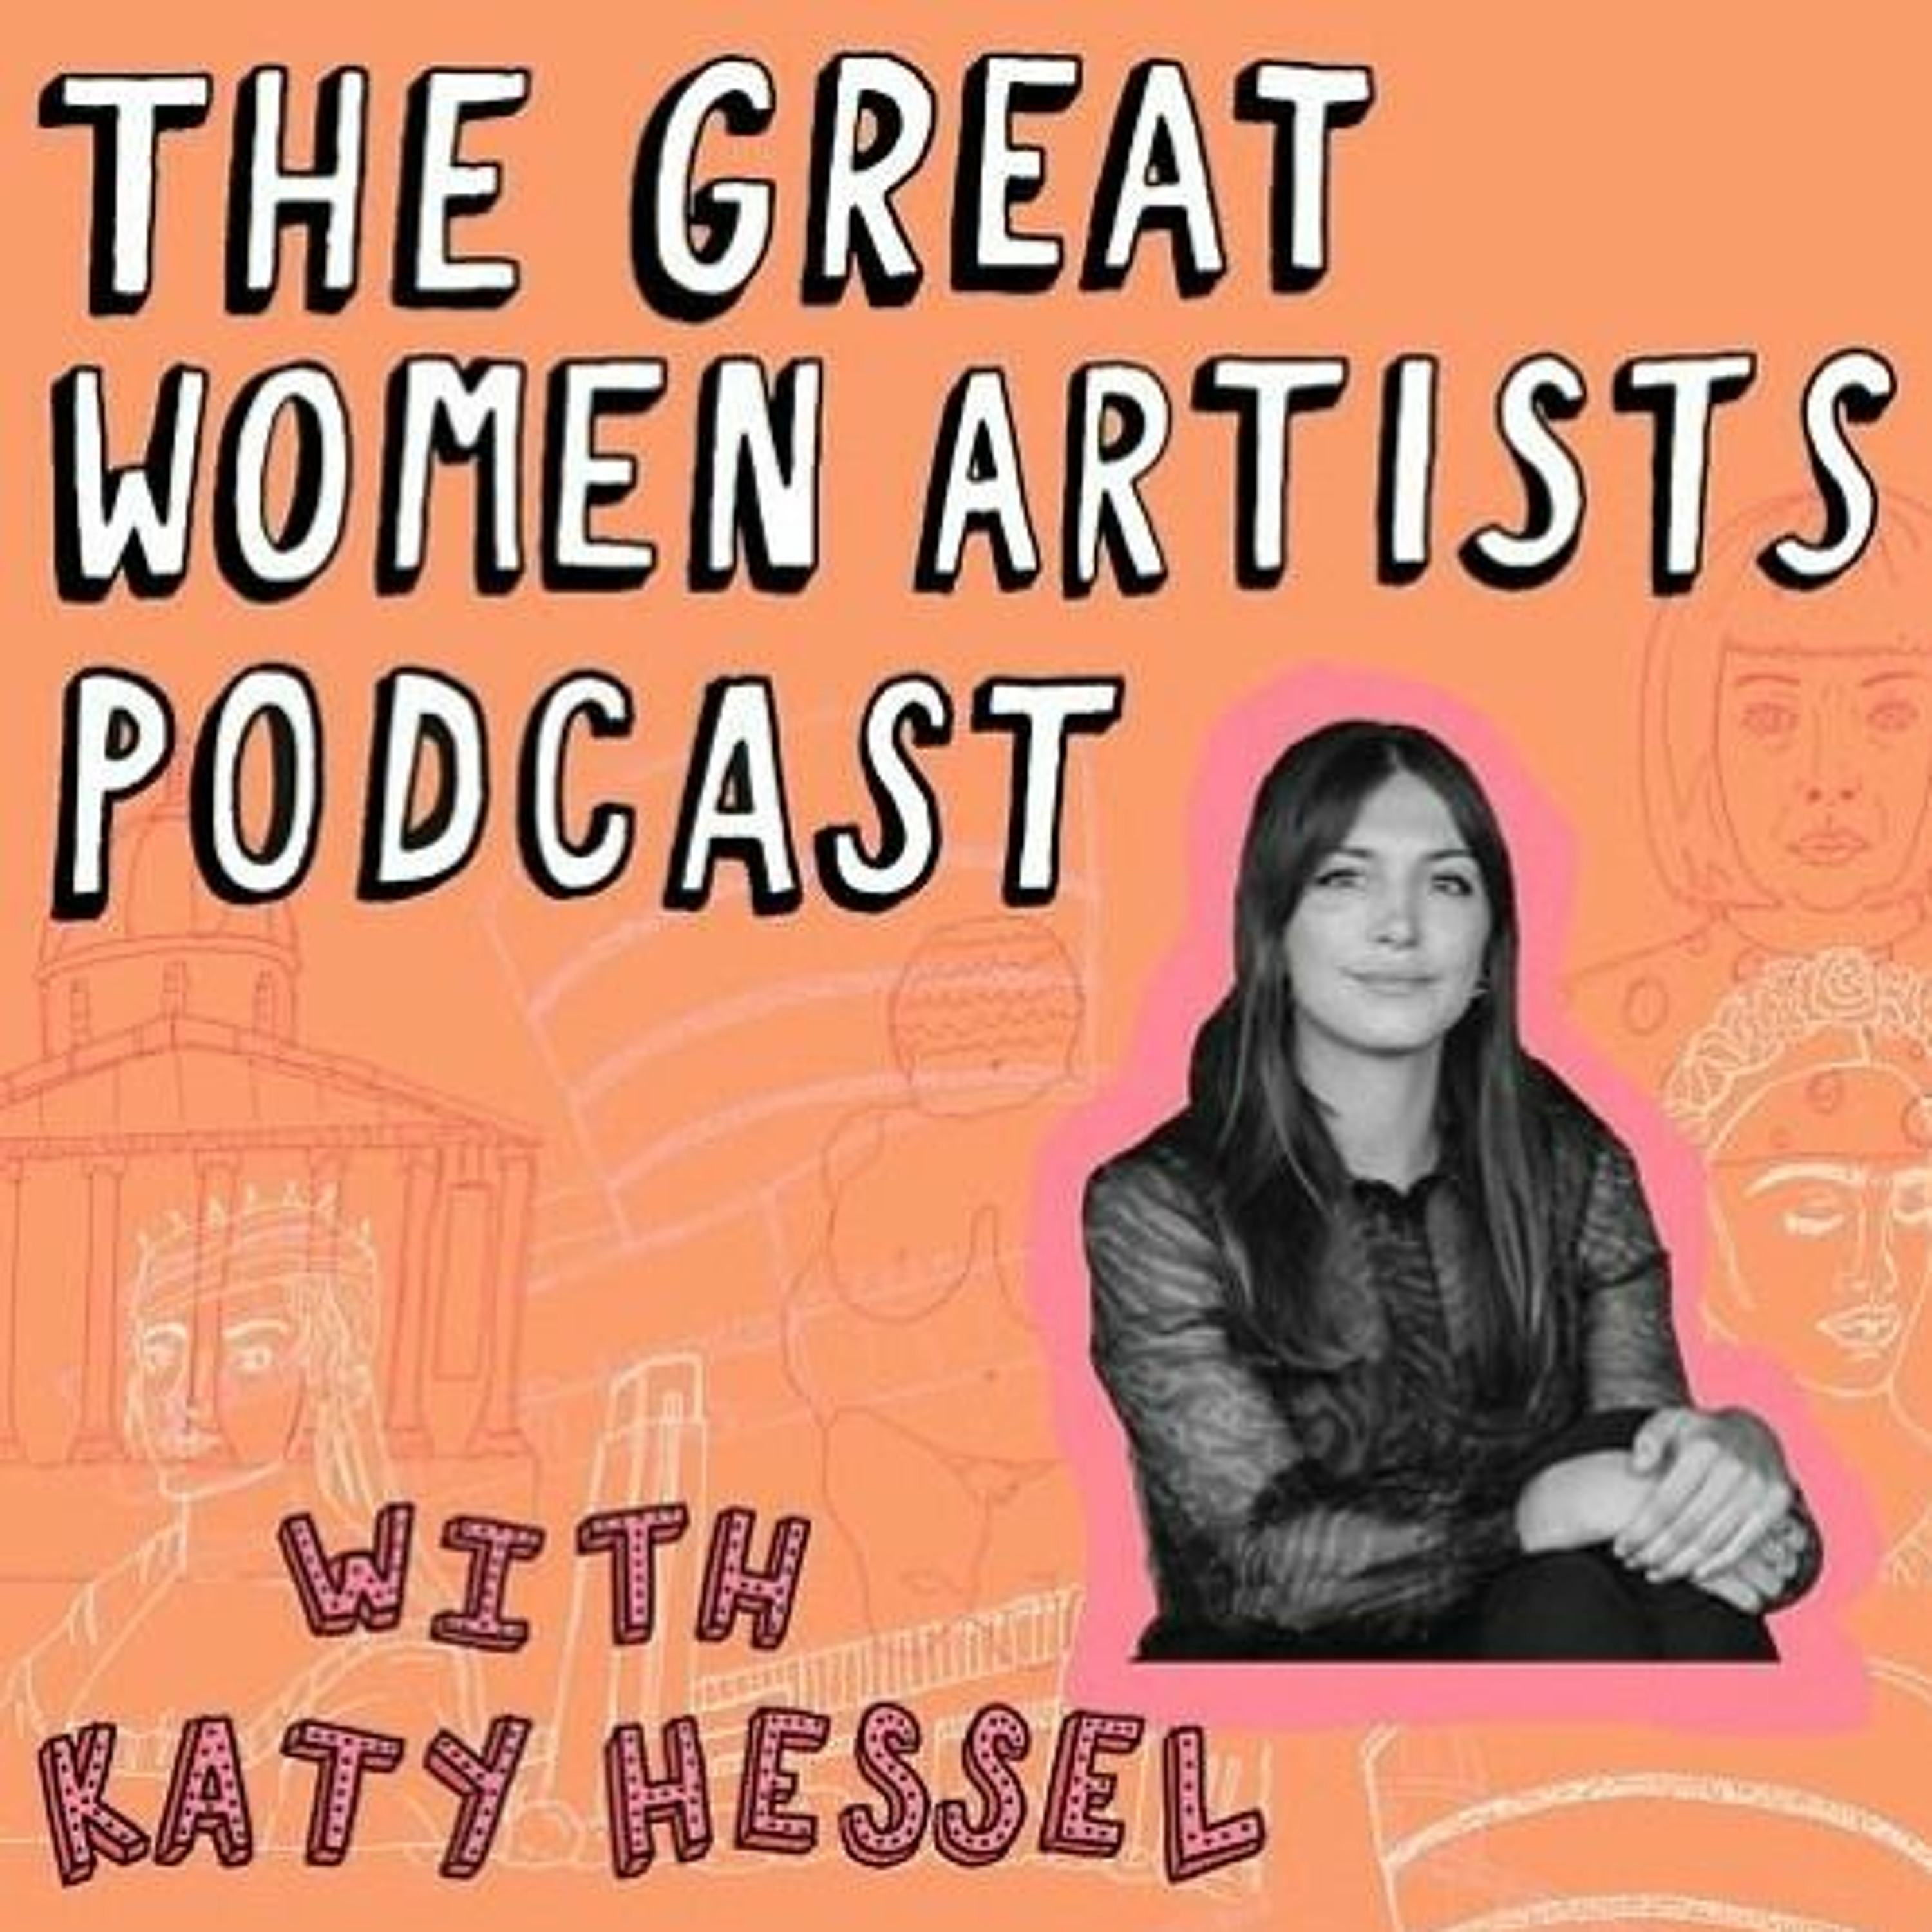 Mary Beard on Classical Women (100th episode special!)